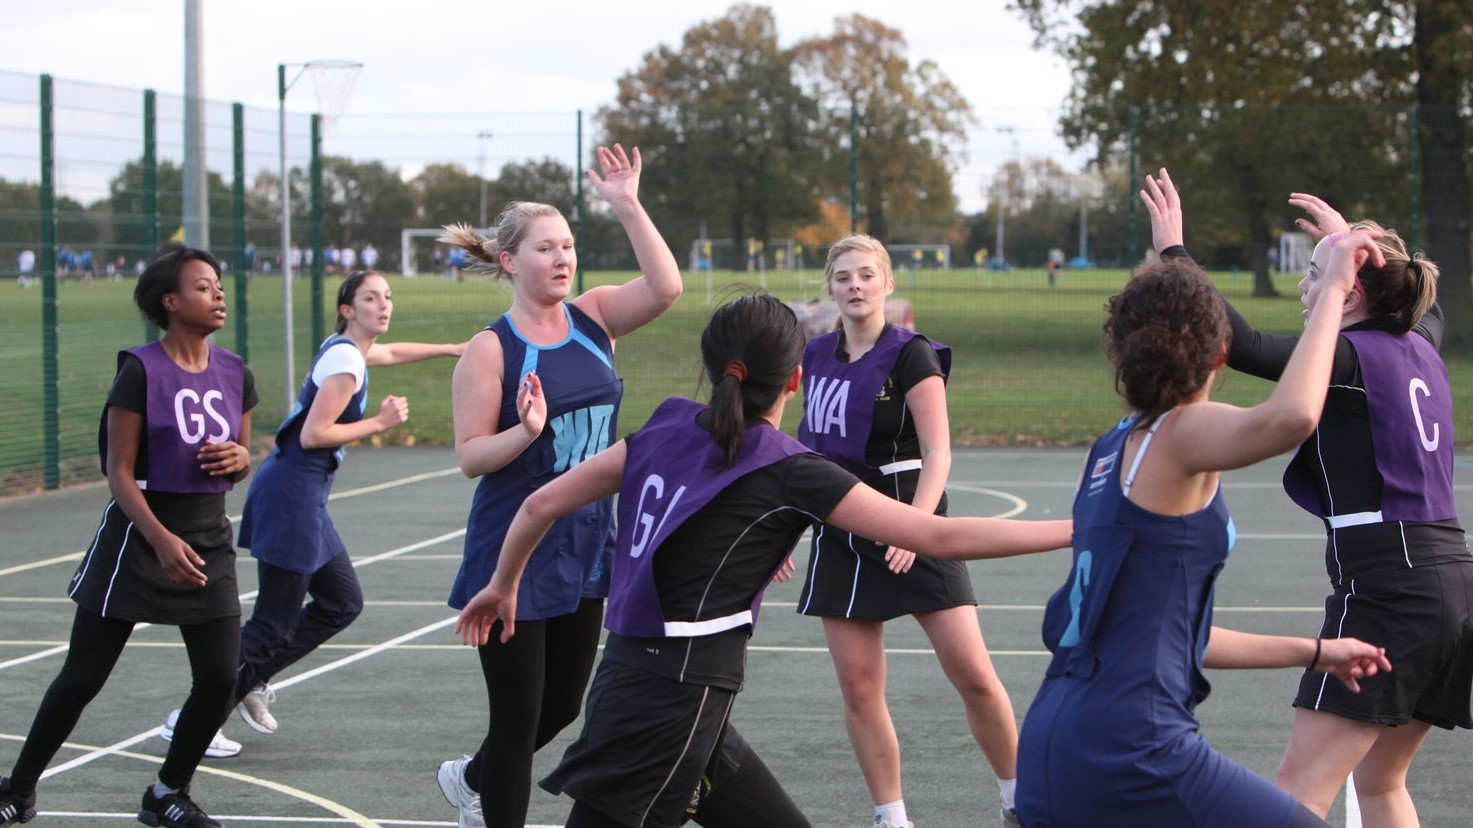 LSE Netball team during a match at the LSE Sportsground in New Malden, Surrey